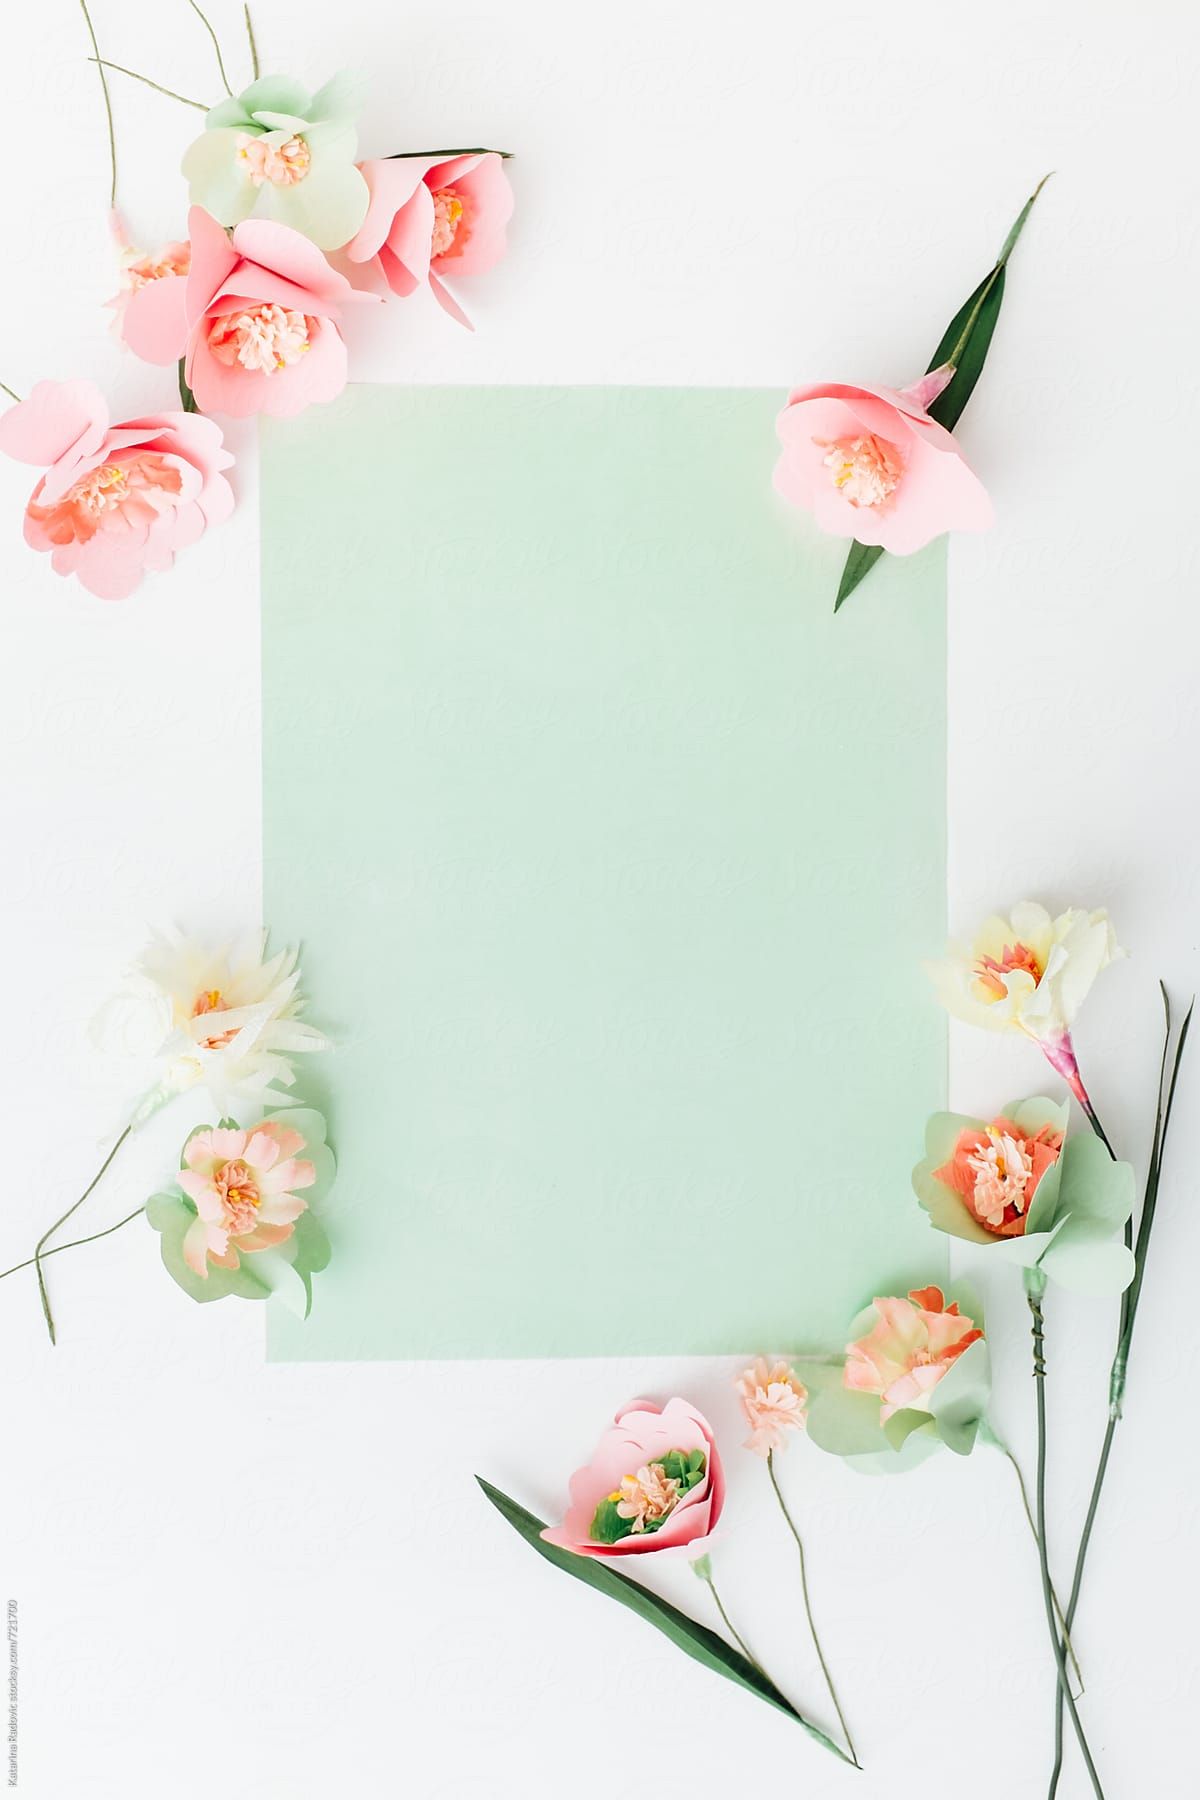 Paper Flowers Arranged With A Green Pastel Background by Katarina Radovic. Pastel background, Pastel iphone wallpaper, Flower wallpaper